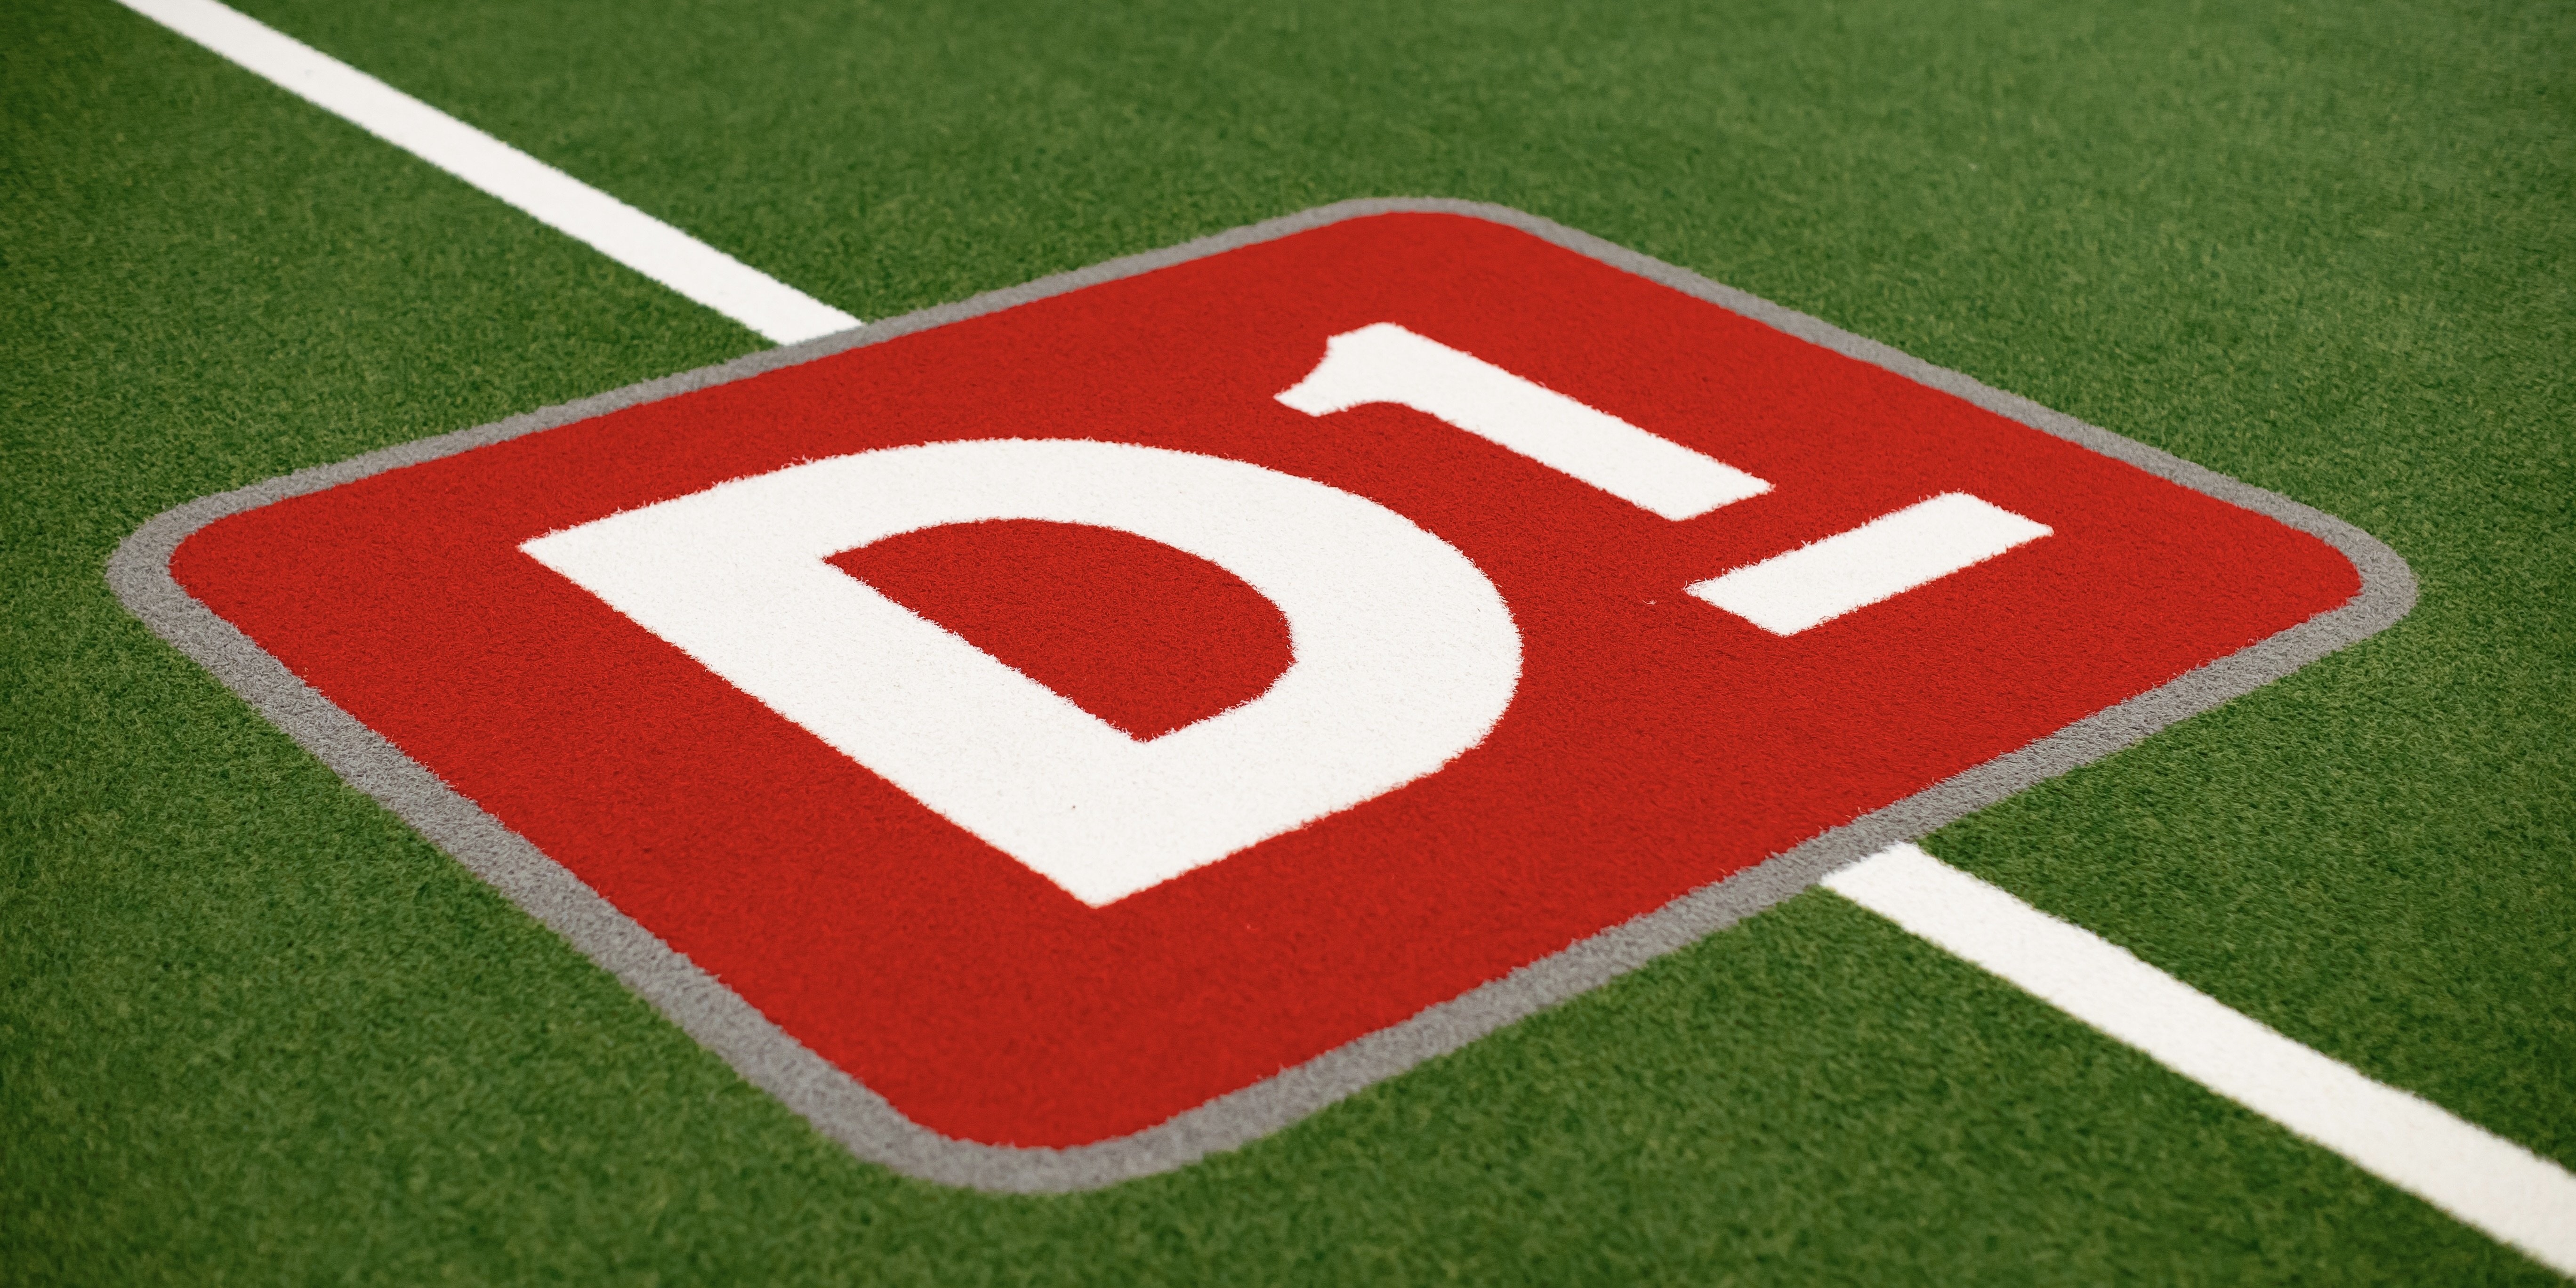 D1 Training, The Place for the Athlete, Sees Explosive Franchise Growth in Q1